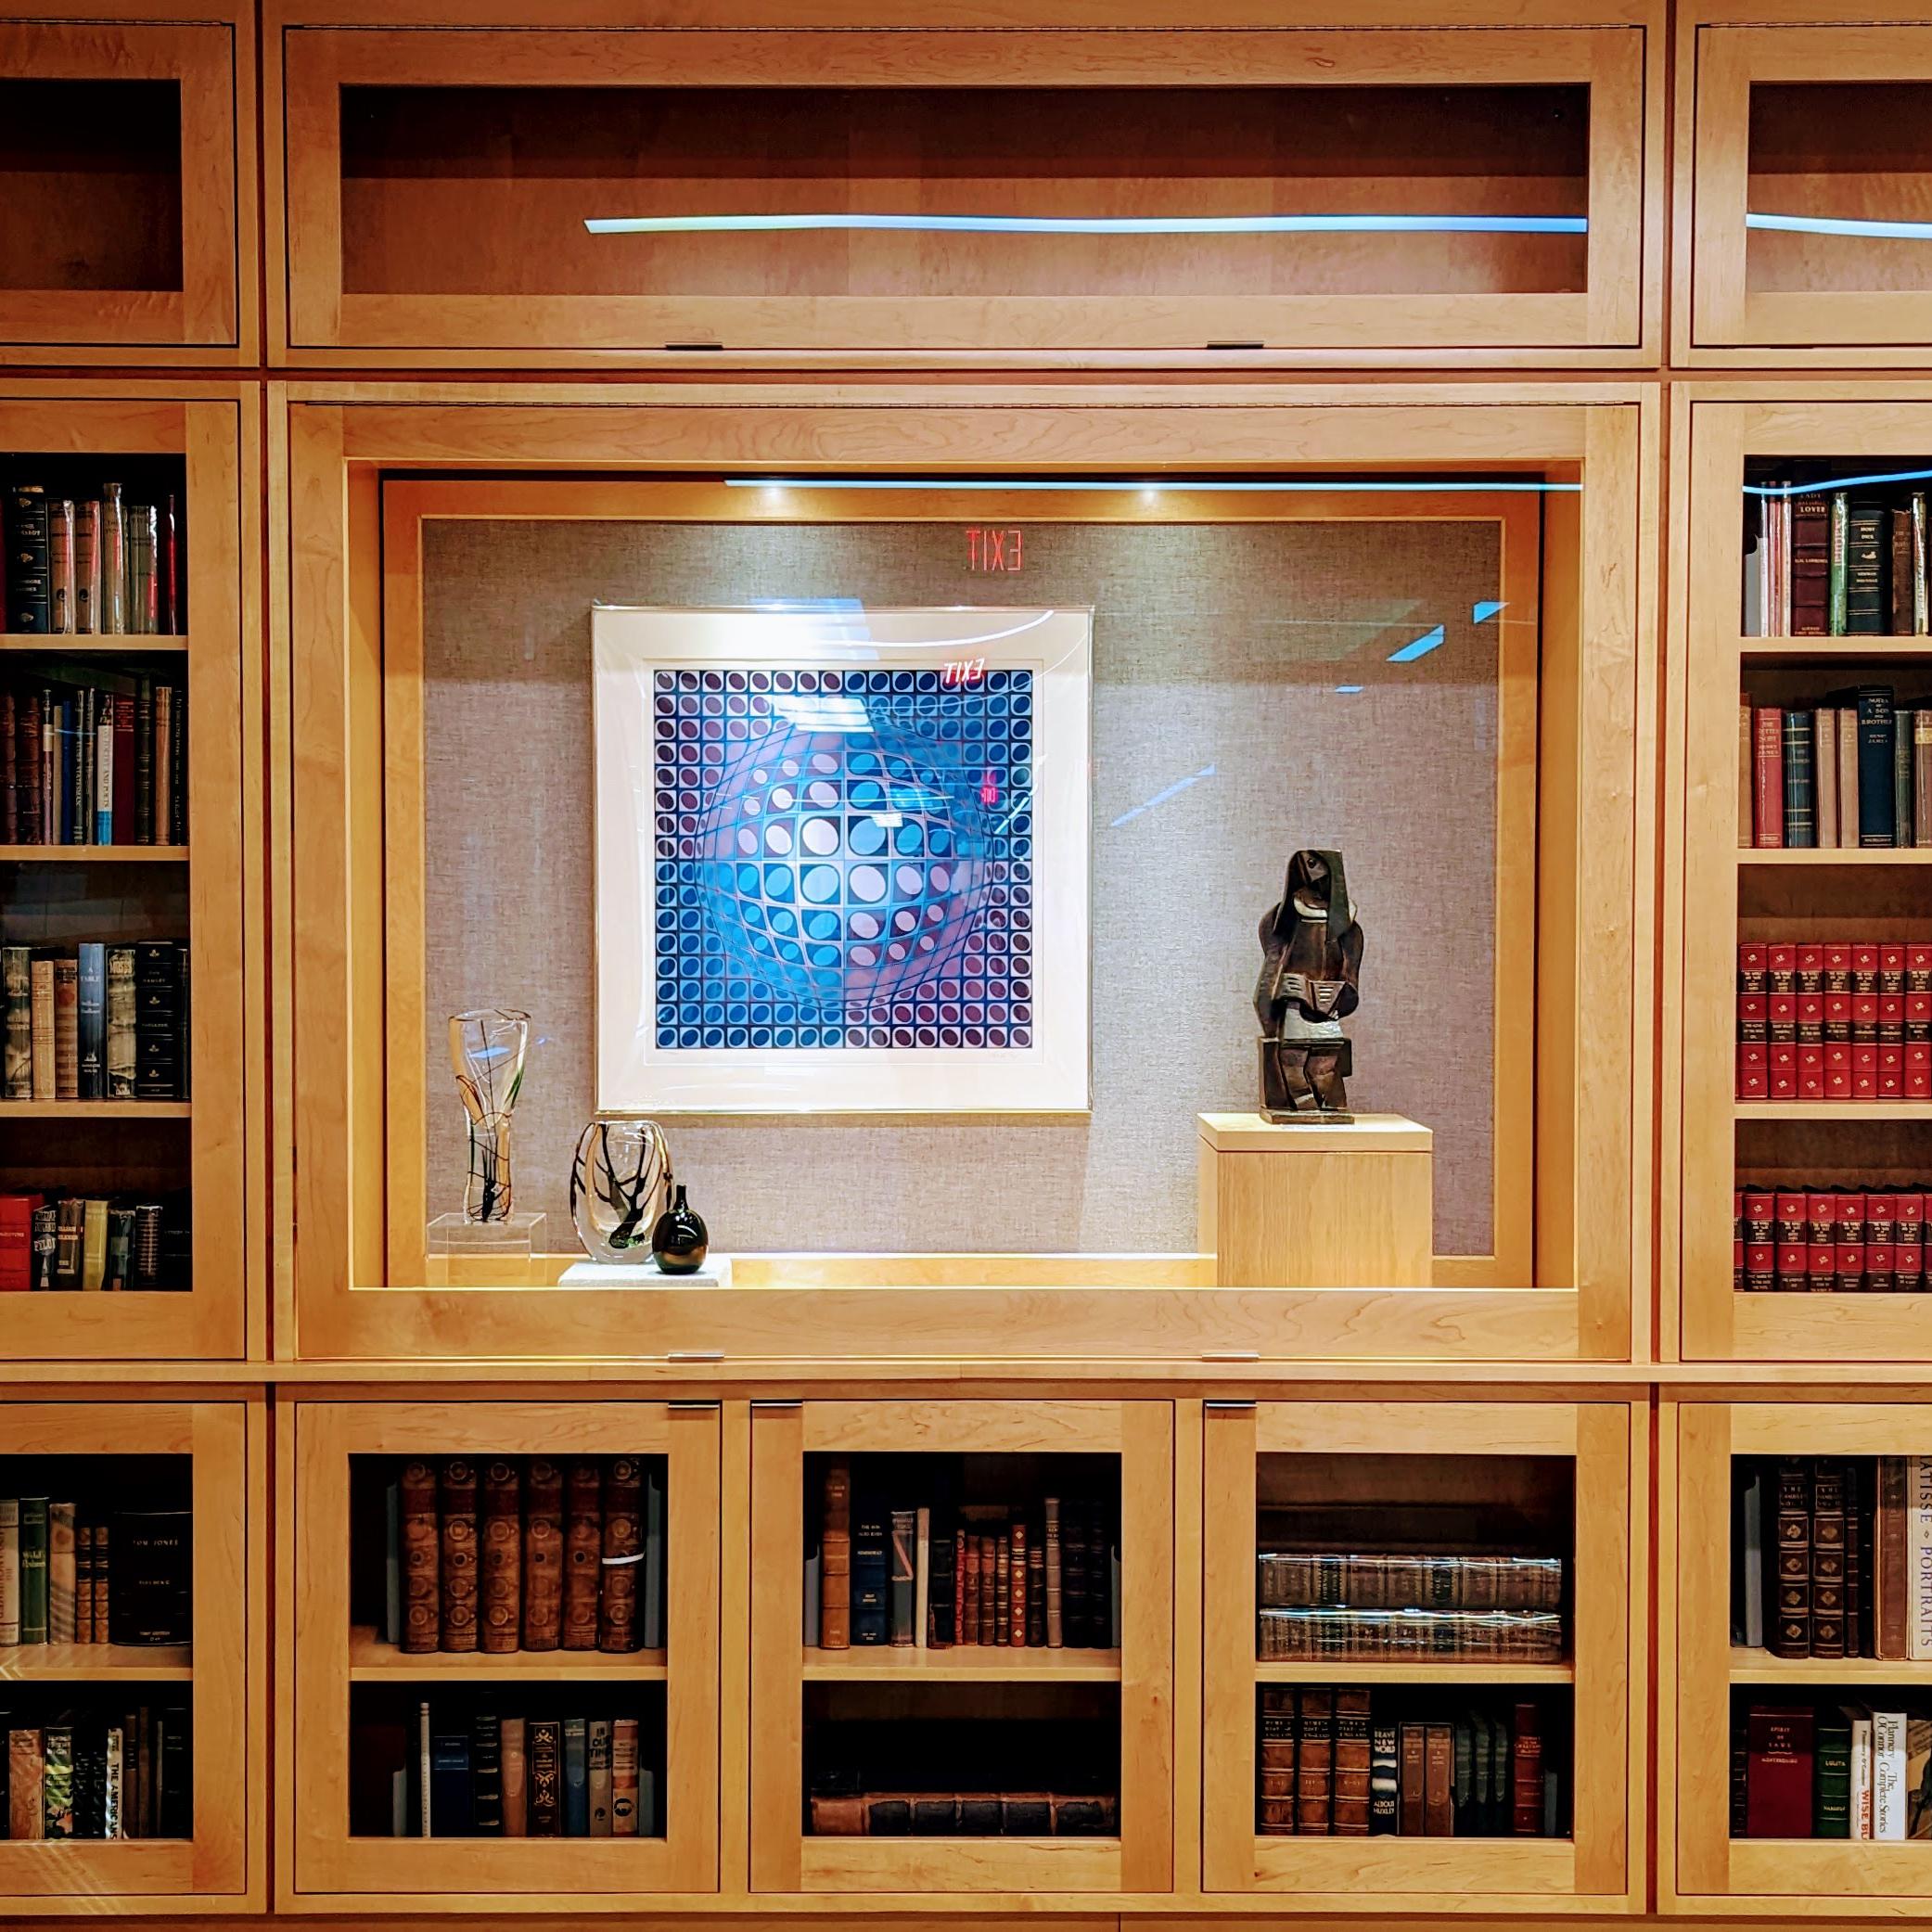 A photograph of the rare book collection at Carleton College's Gould Library.